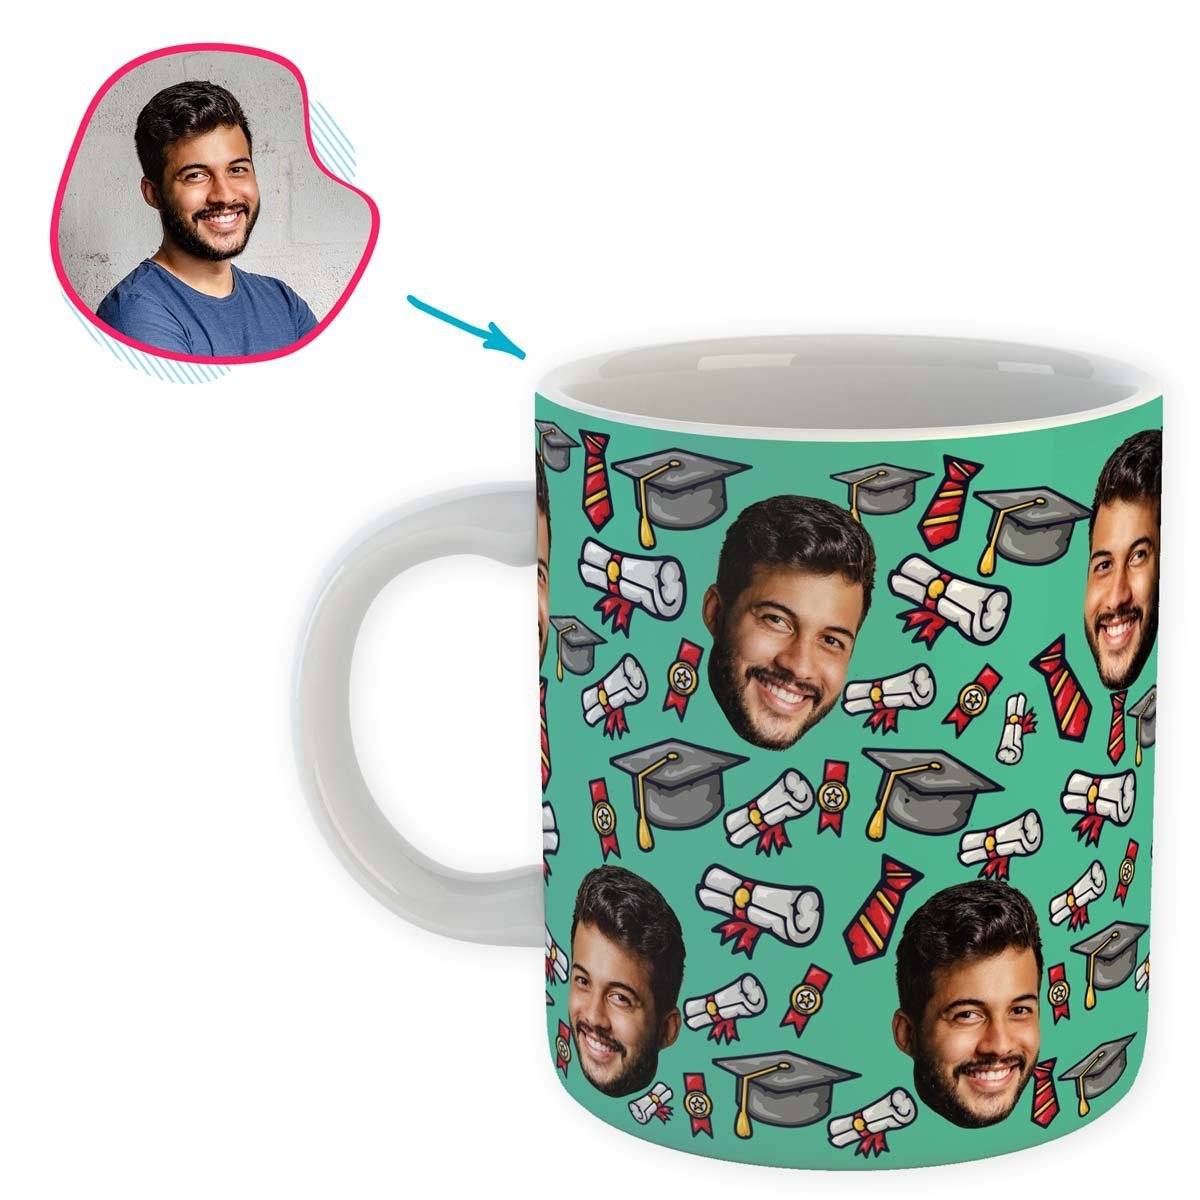 Mint Students & Graduates personalized mug with photo of face printed on it